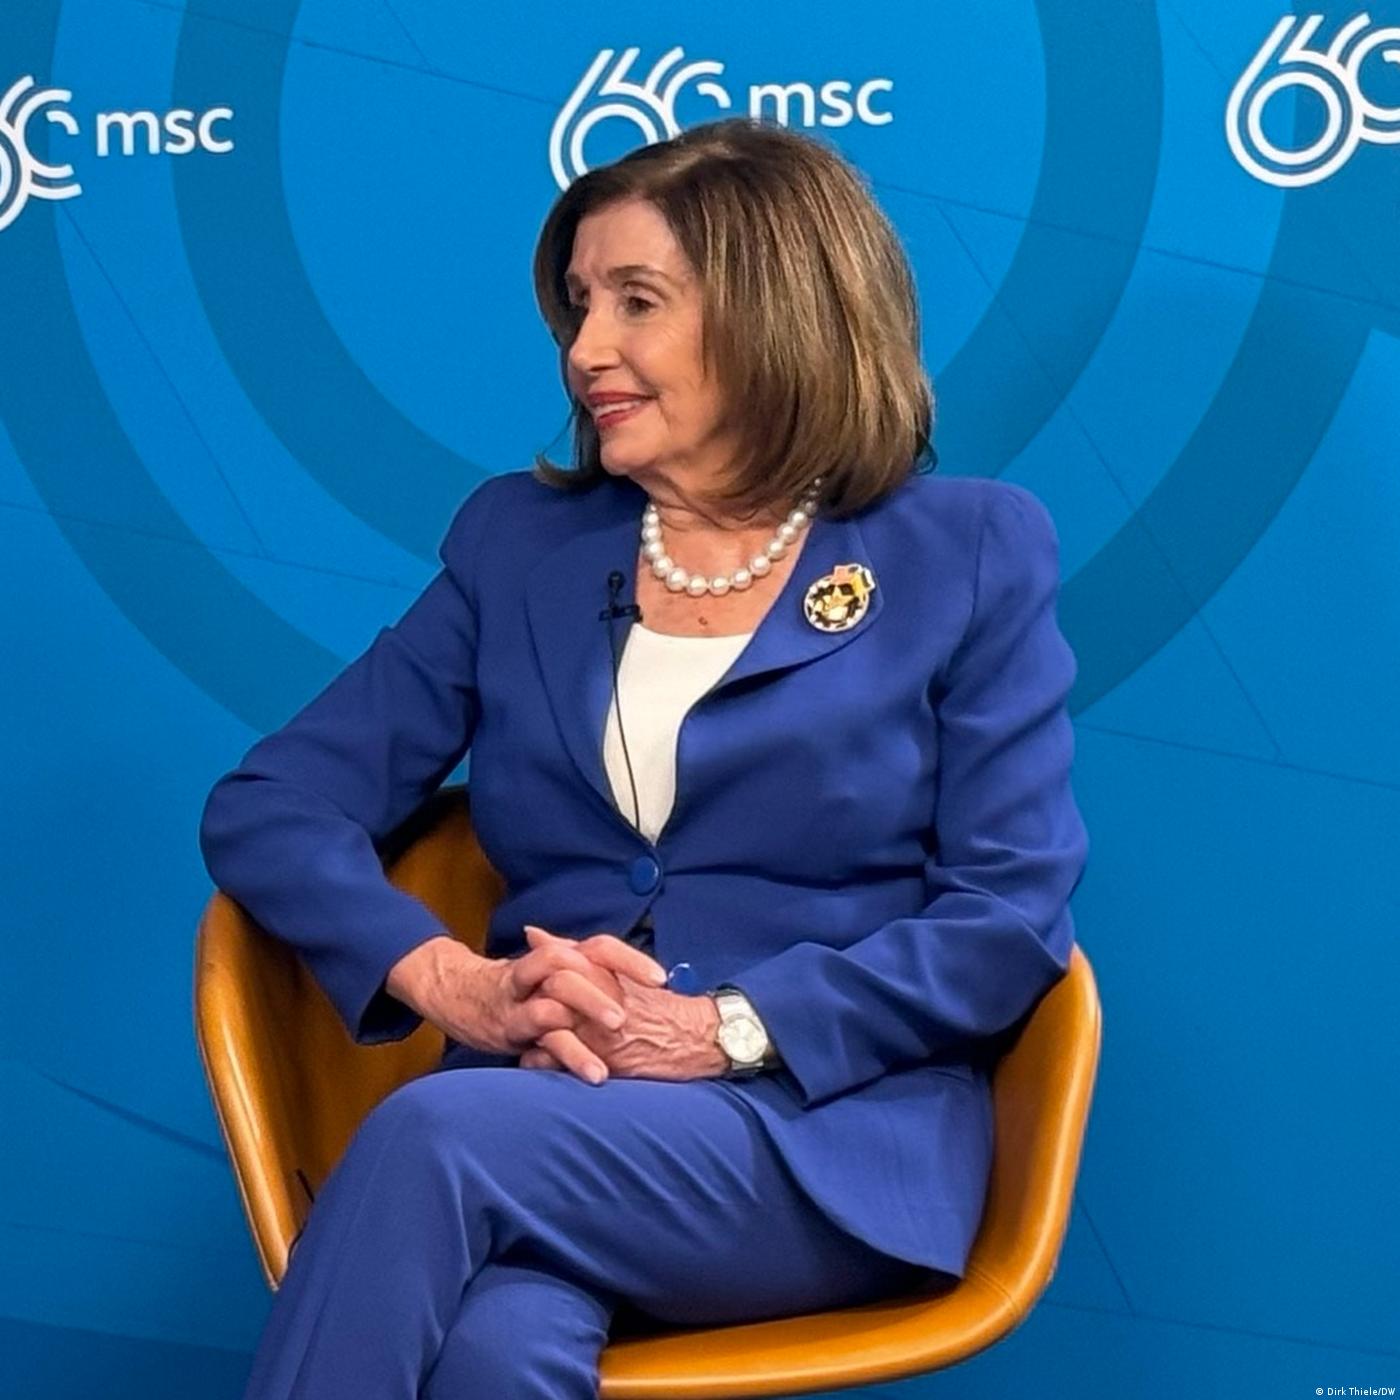 Conflict Zone Podcast with Nancy Pelosi: ’The behavior of Netanyahu is inexcusable’